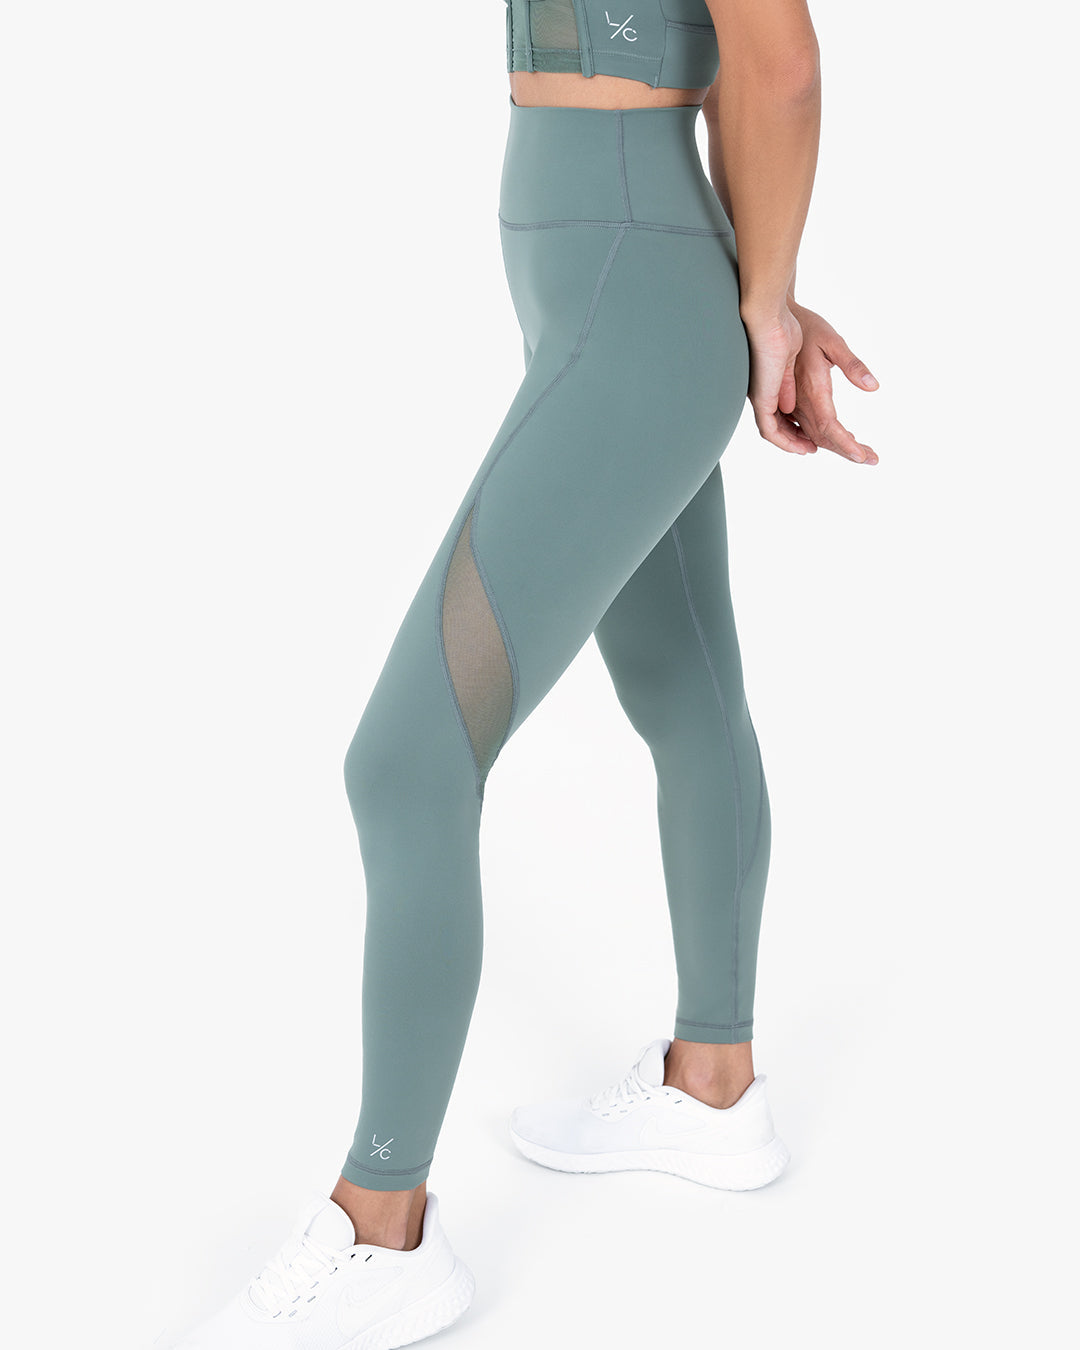 Buy Mint Lilac Women's Yoga Leggings Pants with Mesh Panel and